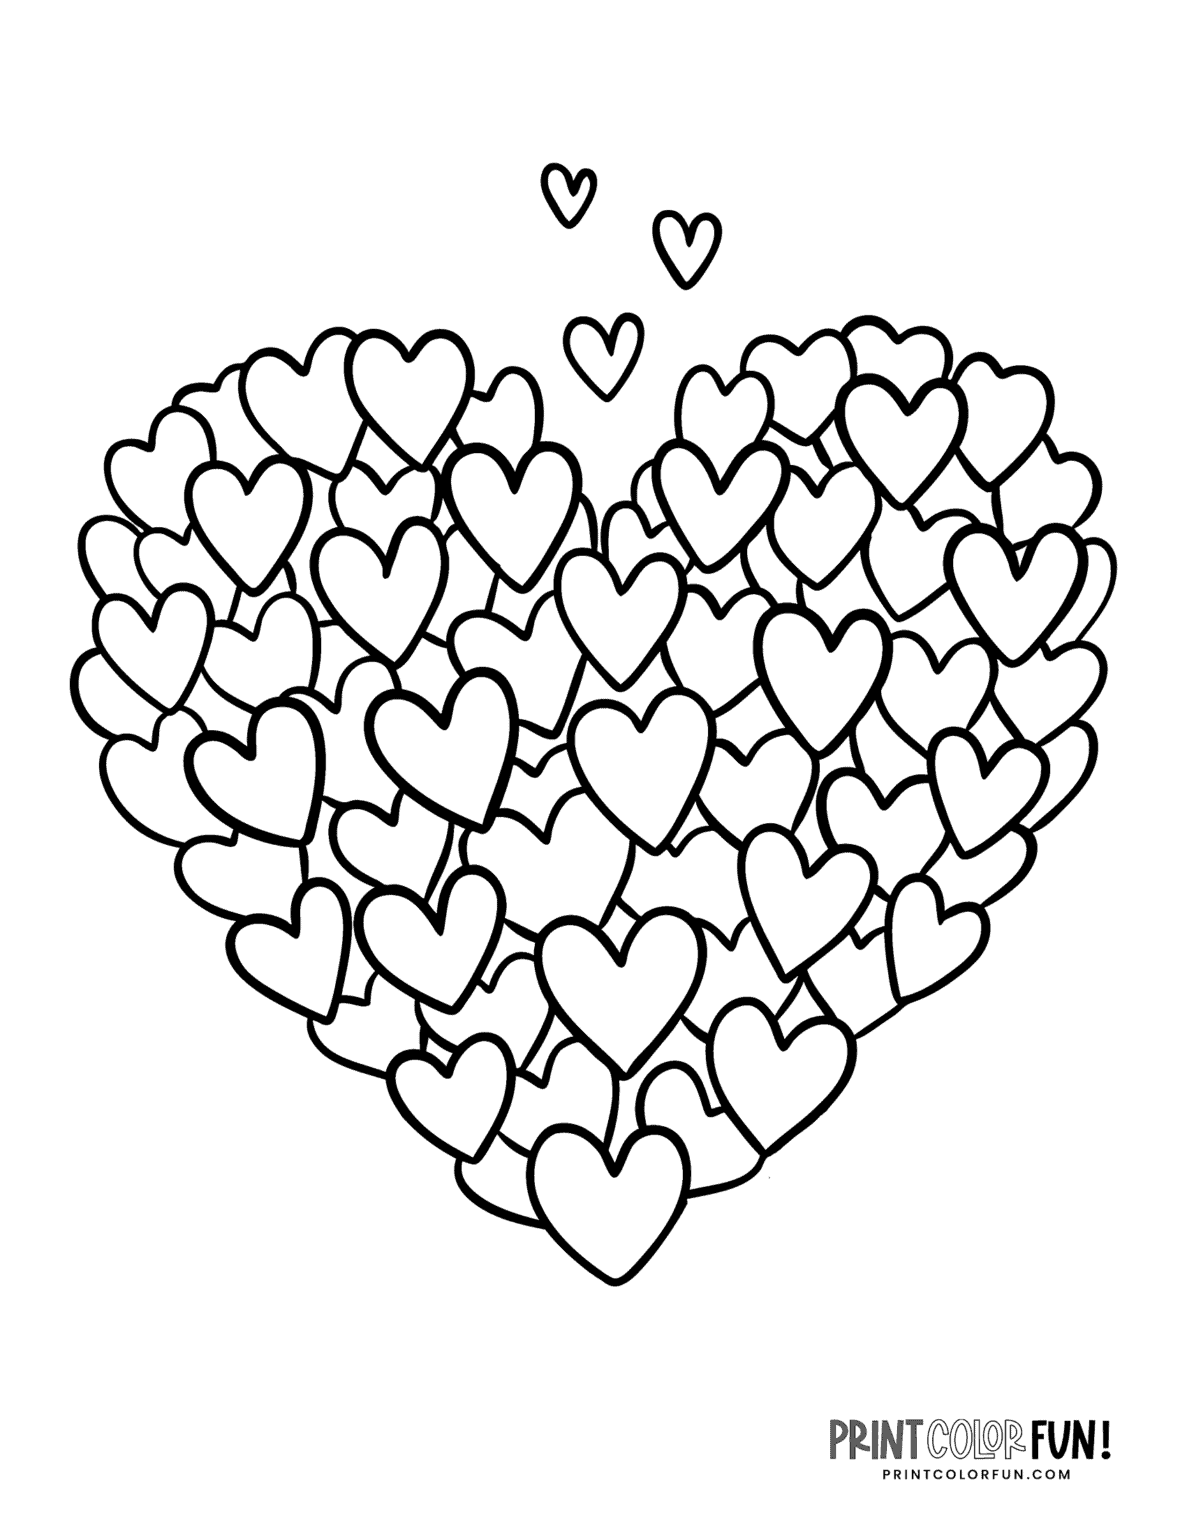 Free Printable Heart Coloring Pages For Adults